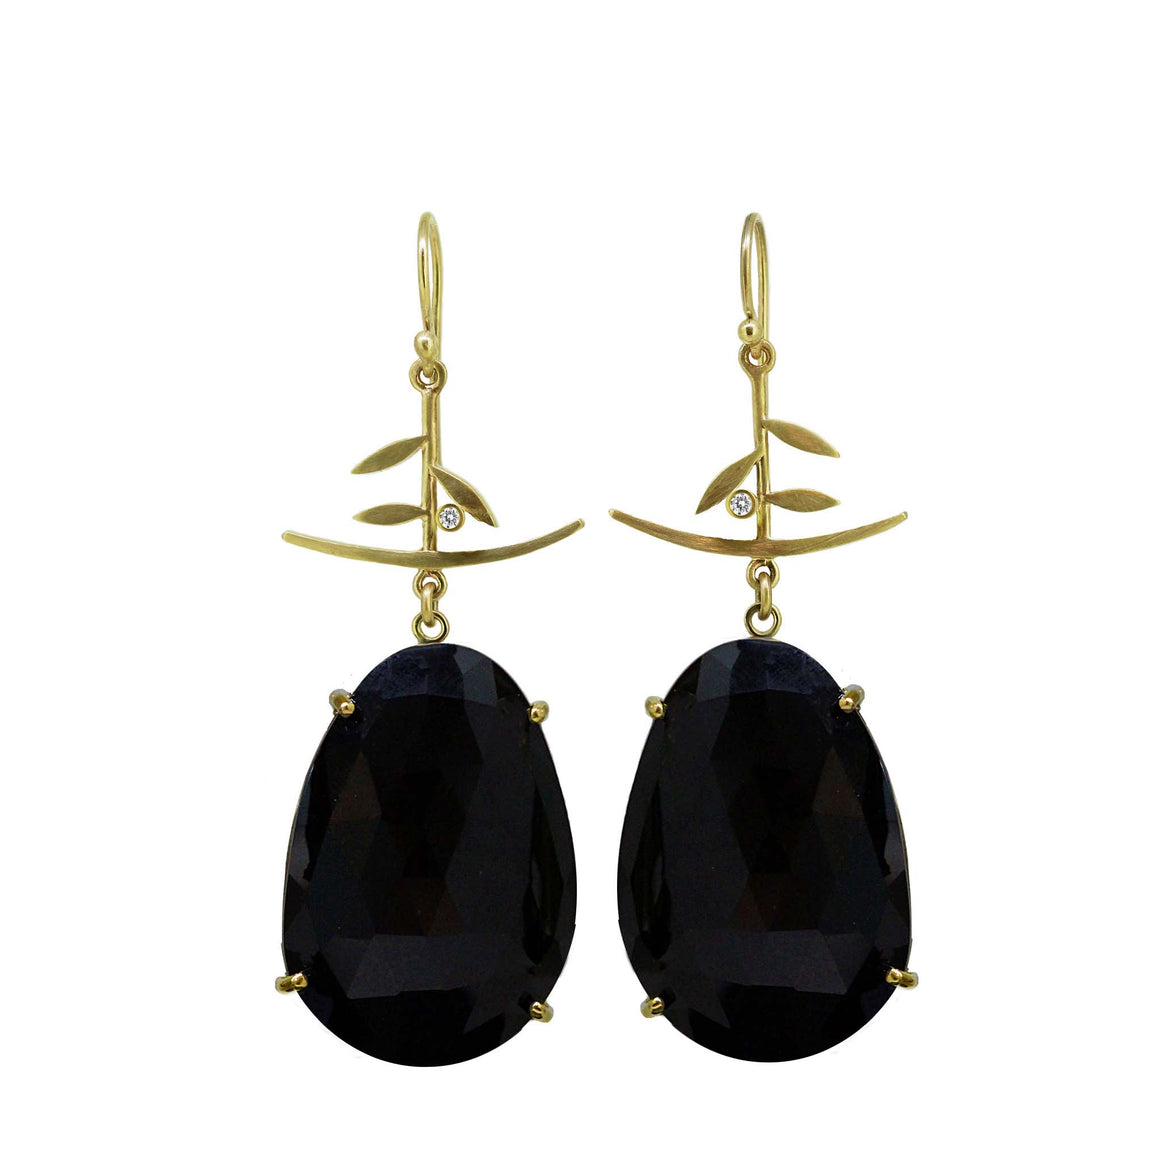 Chinoiserie black spinel earrings in yellow gold with diamond details